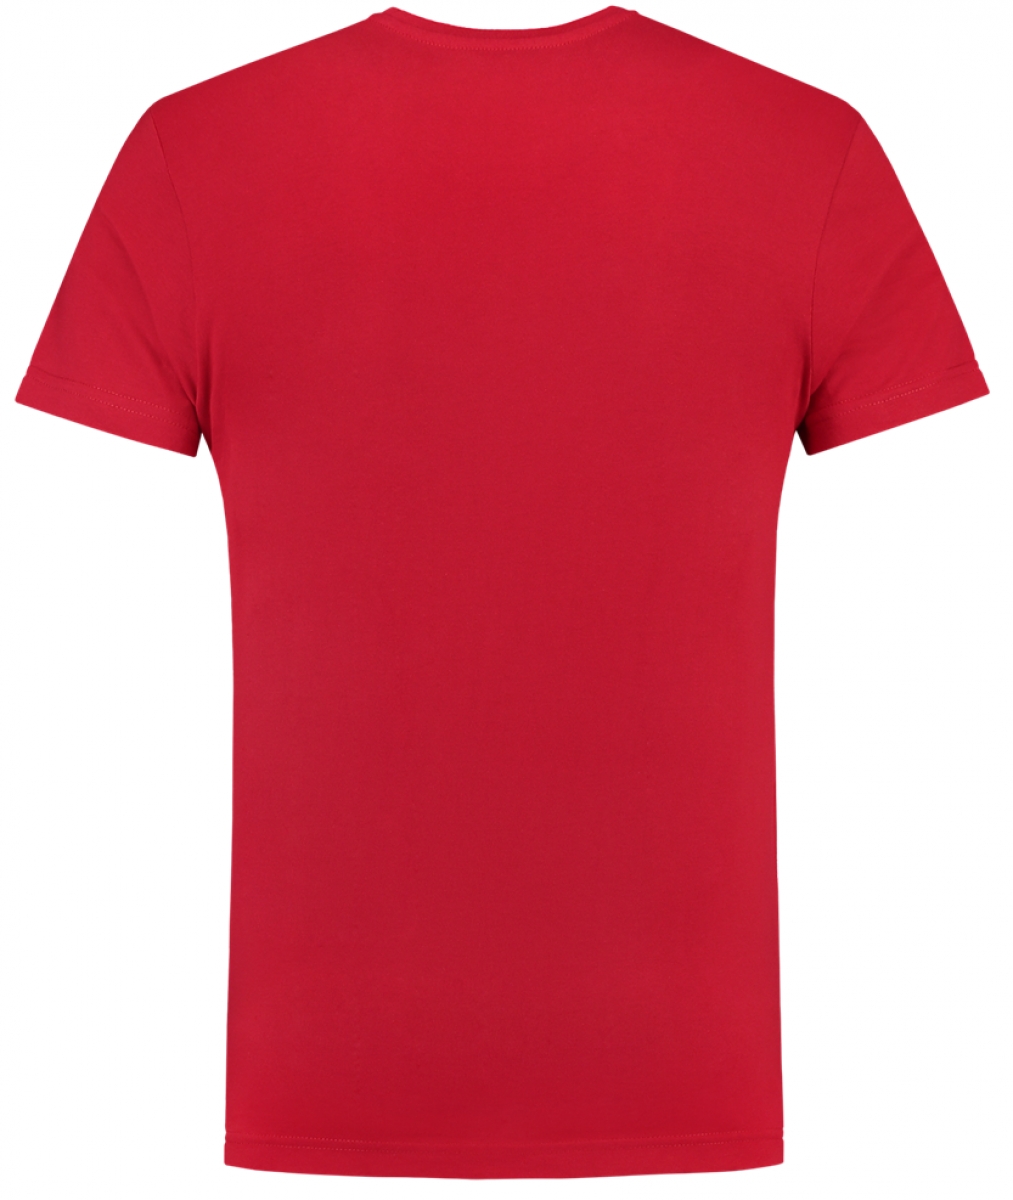 TRICORP-Worker-Shirts, T-Shirts, Slim Fit, 160 g/m, red